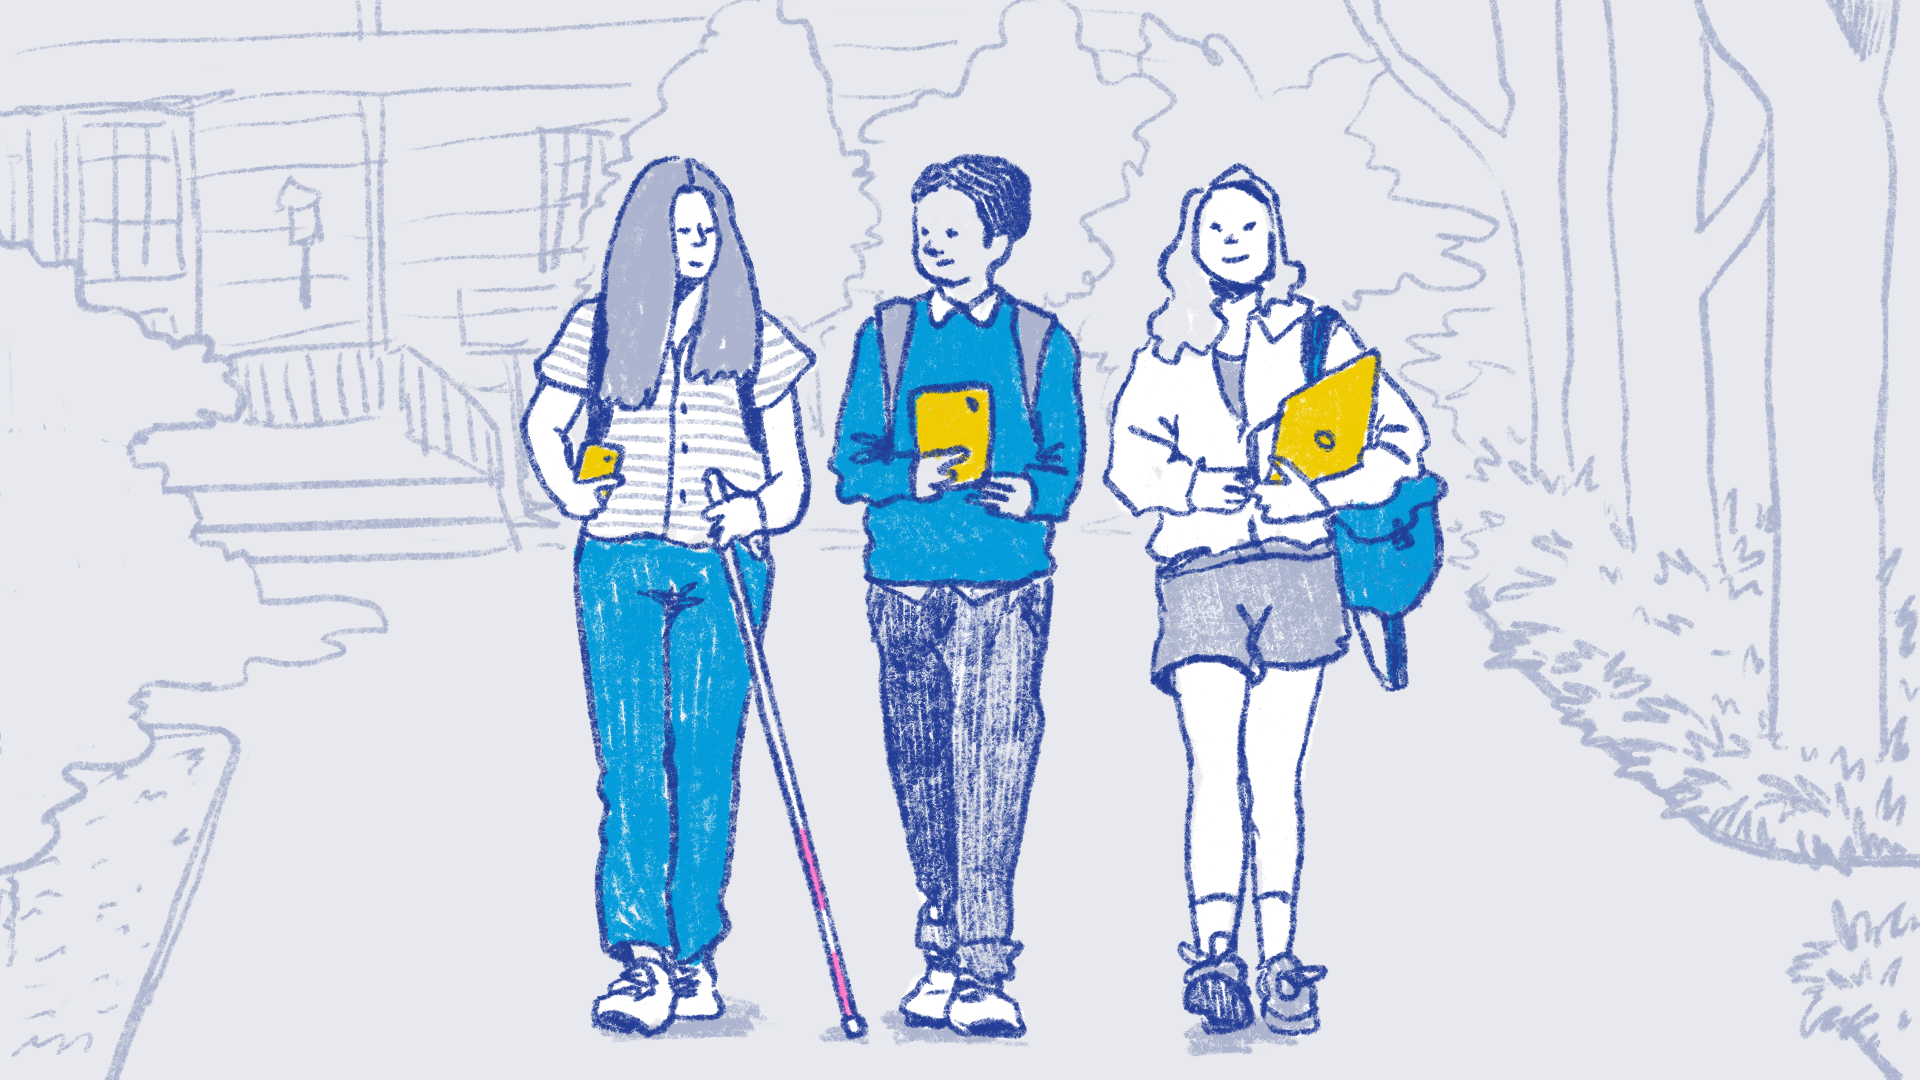 Illustration with three college students walking outdoors. They're carrying backpacks and holding a device. The student on the left also uses a white cane.